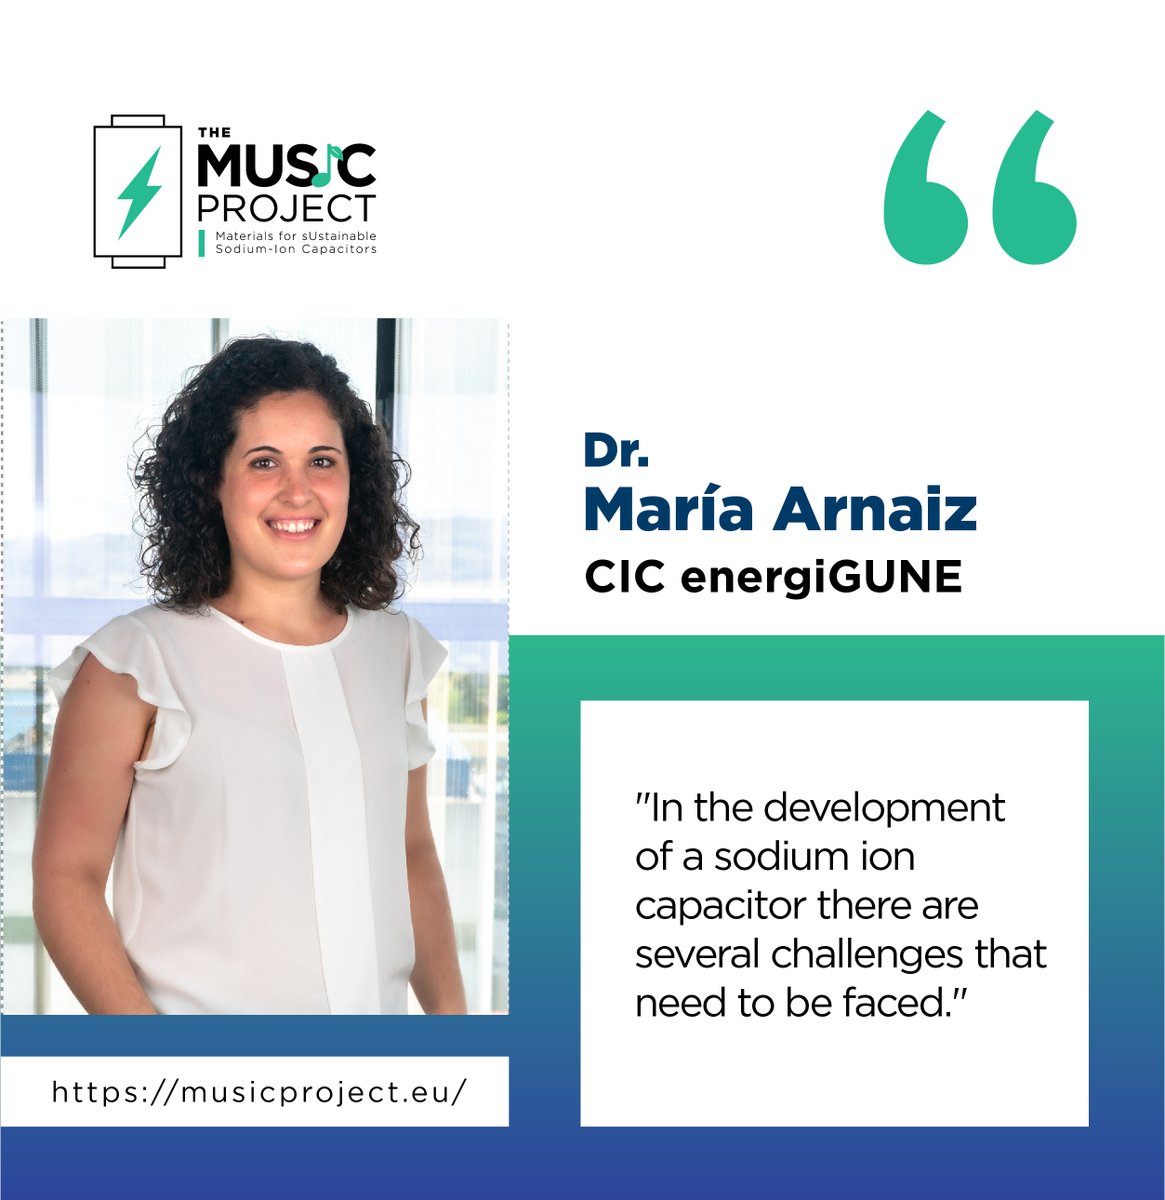 🌟 New Q&A Alert! 🌟 Dive into the latest from #TheMUSICProject with Dr. María Arnaiz from CIC @energigune_brta. Discover the challenges & breakthroughs in #SodiumIonCapacitors, pushing the bounds of #EnergyStorage. 🛠️🔋 💡 Full insights here: musicproject.eu/en/news-events…